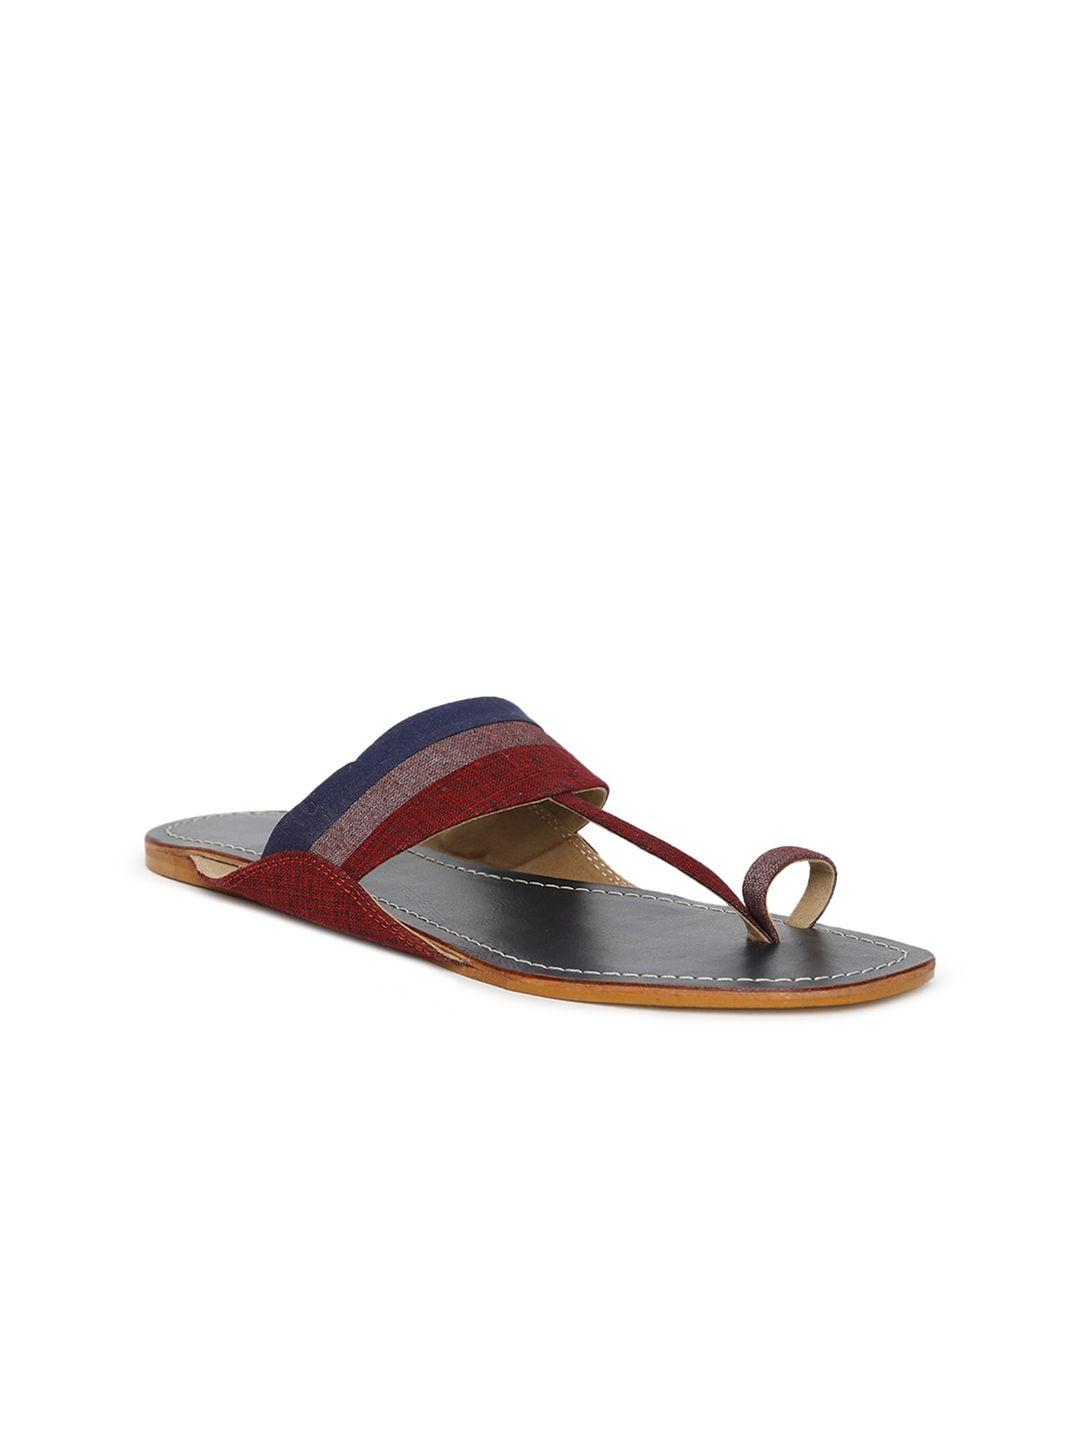 fabindia-women-red-&-blue-striped-leather-one-toe-flats